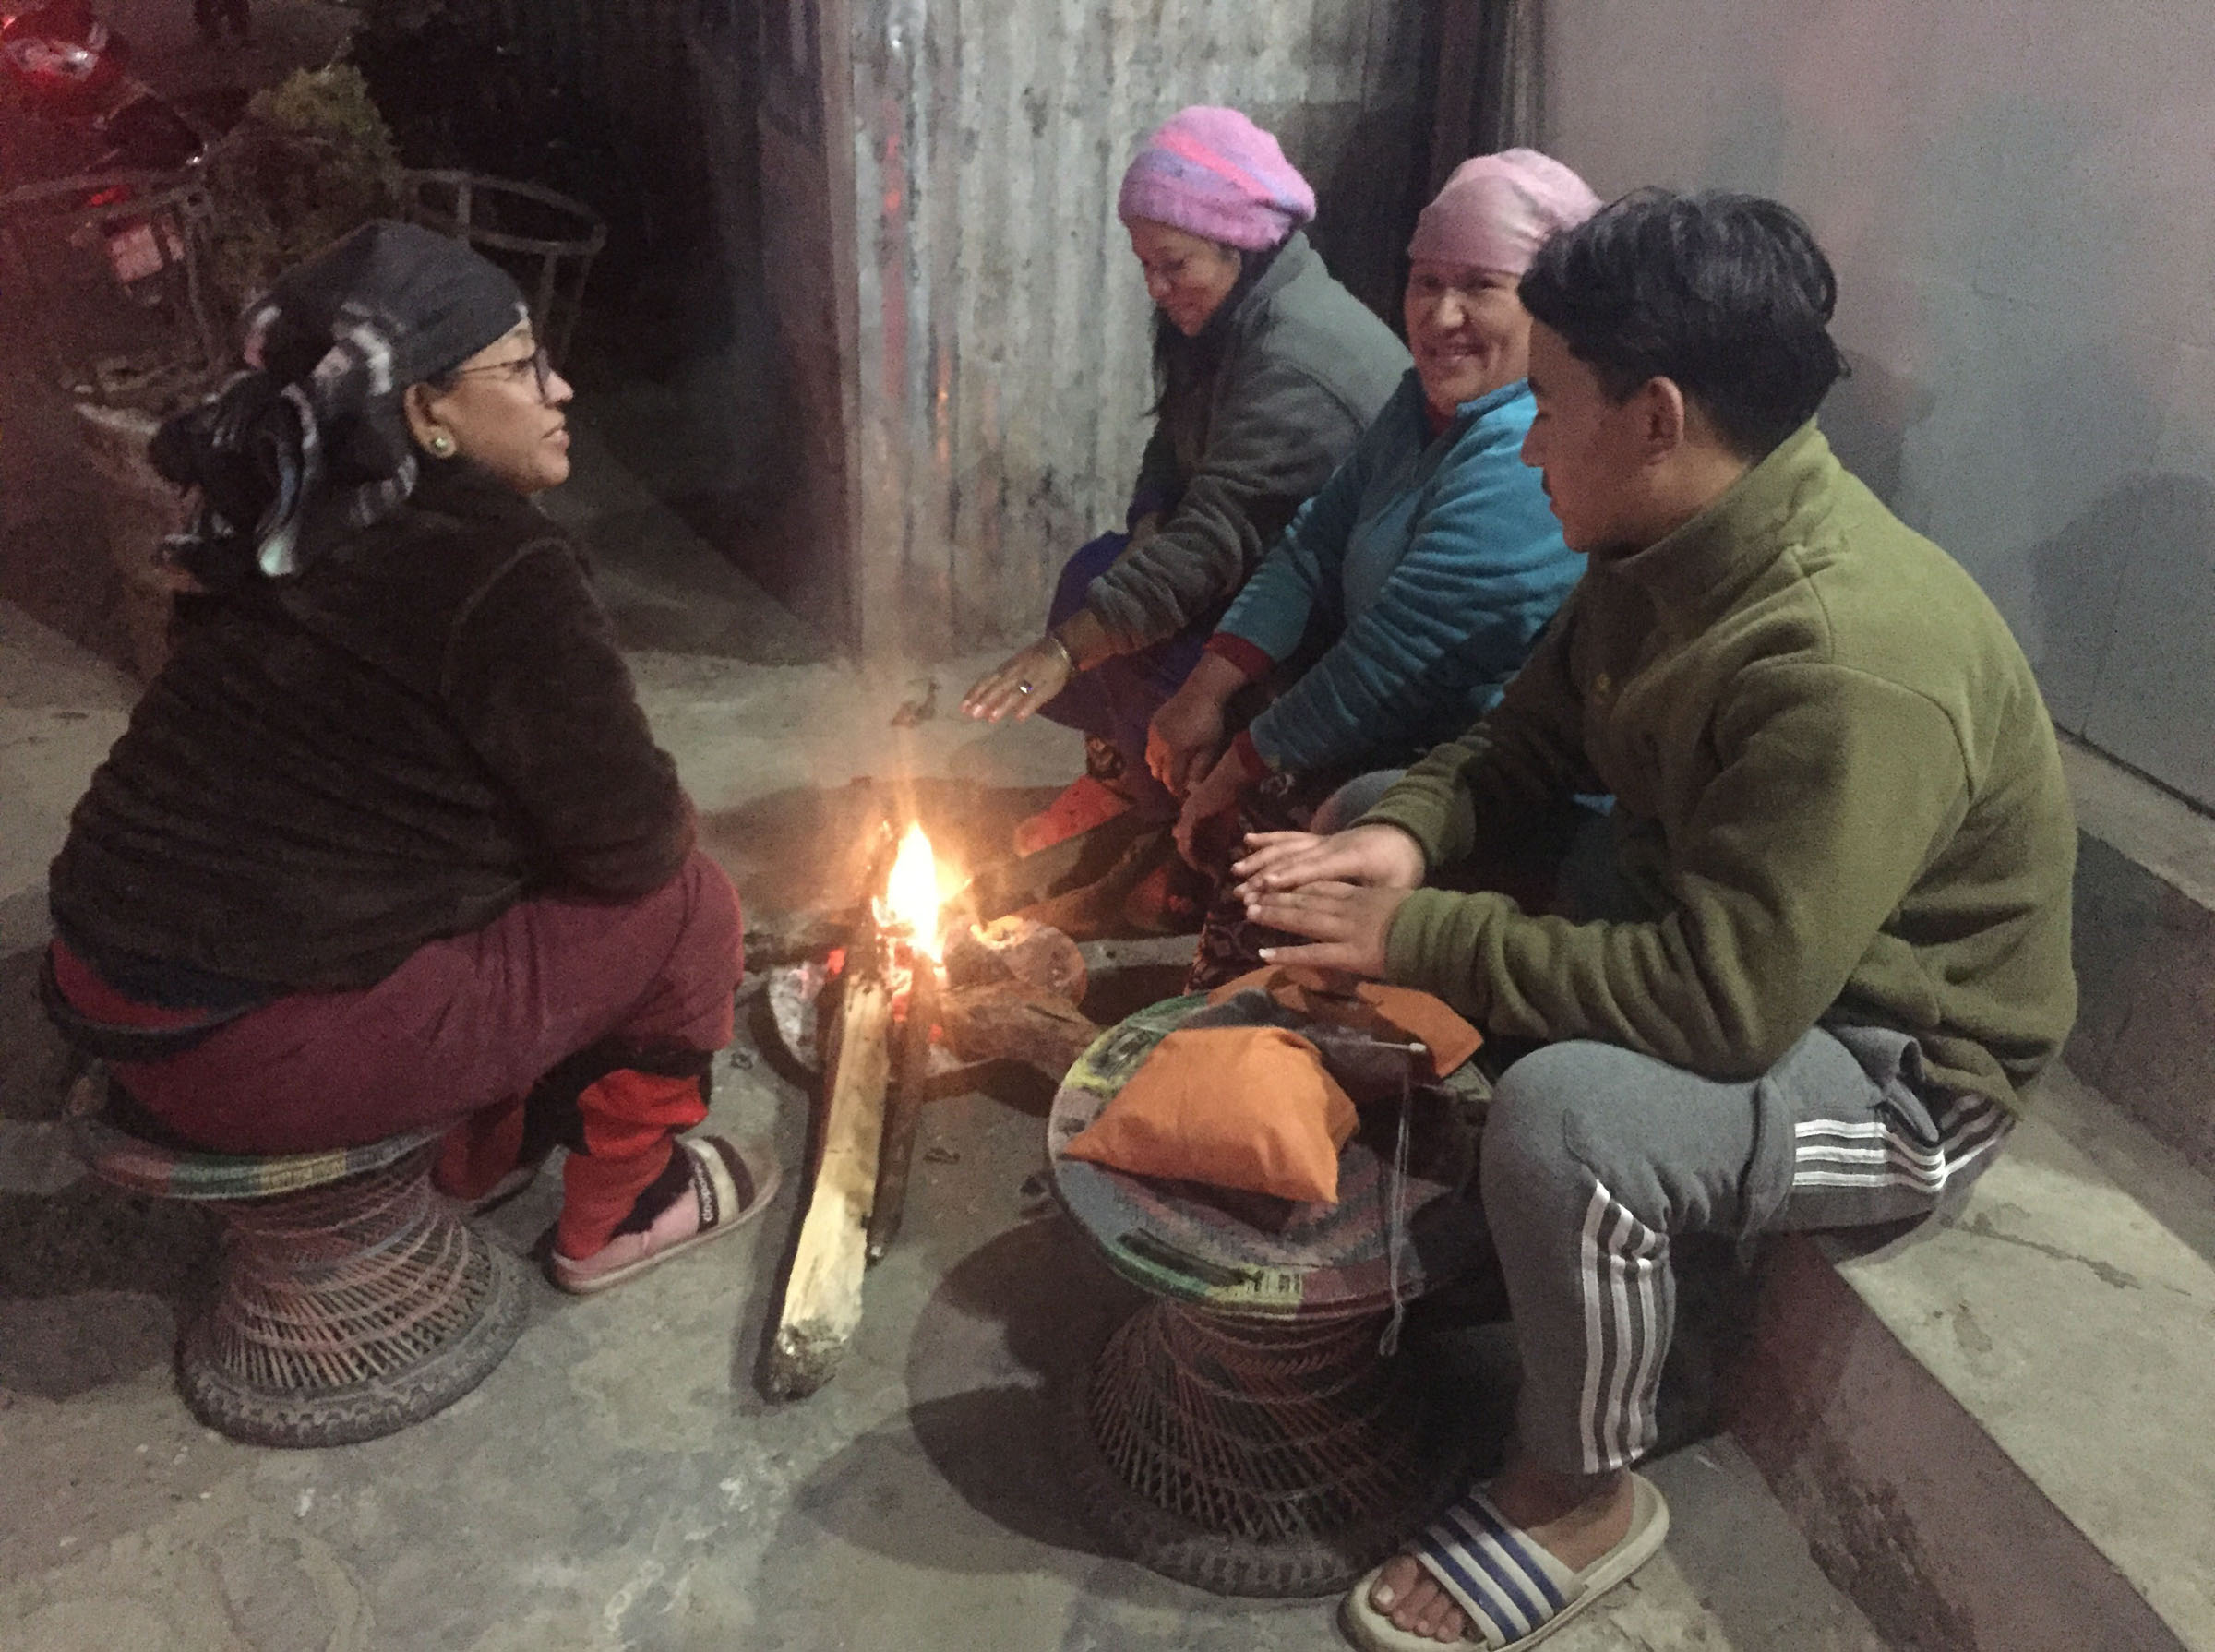 Firewood distributed to keep people protected from cold spell